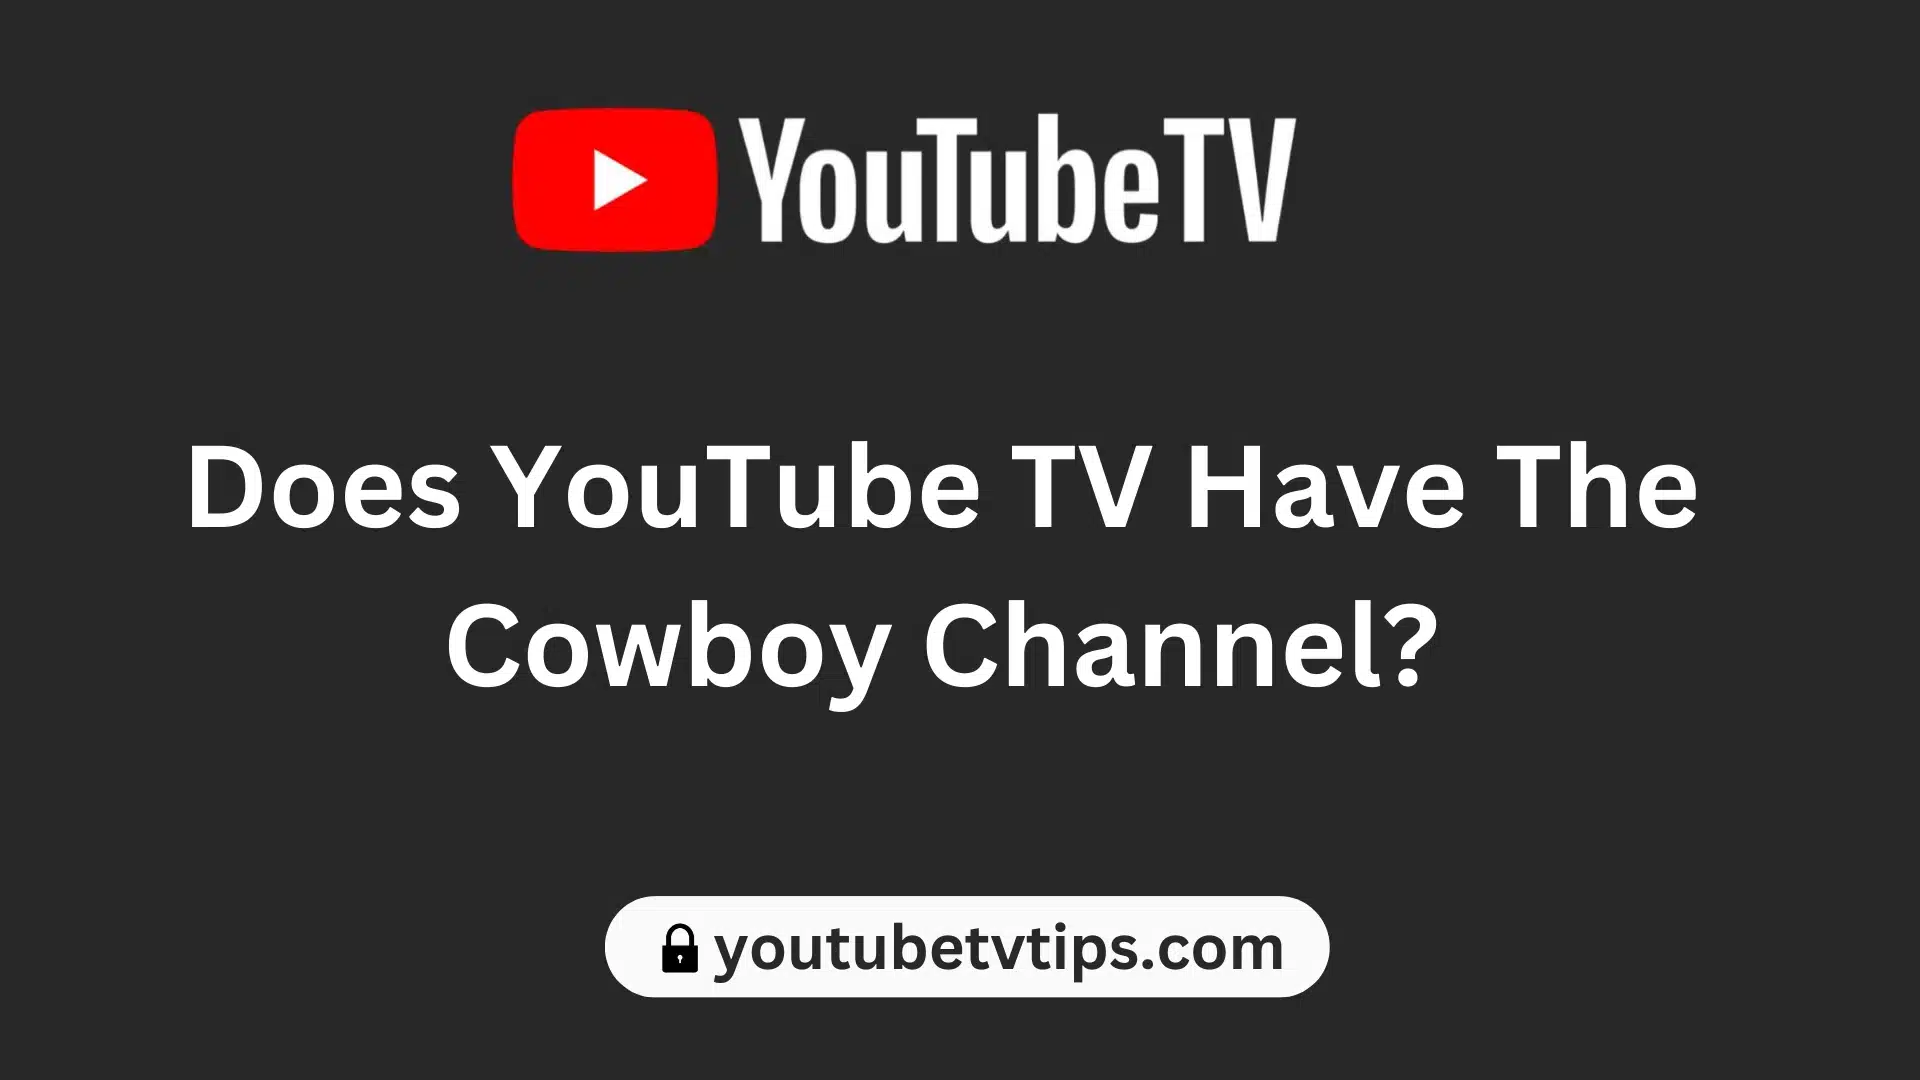 Does YouTube TV Have The Cowboy Channel